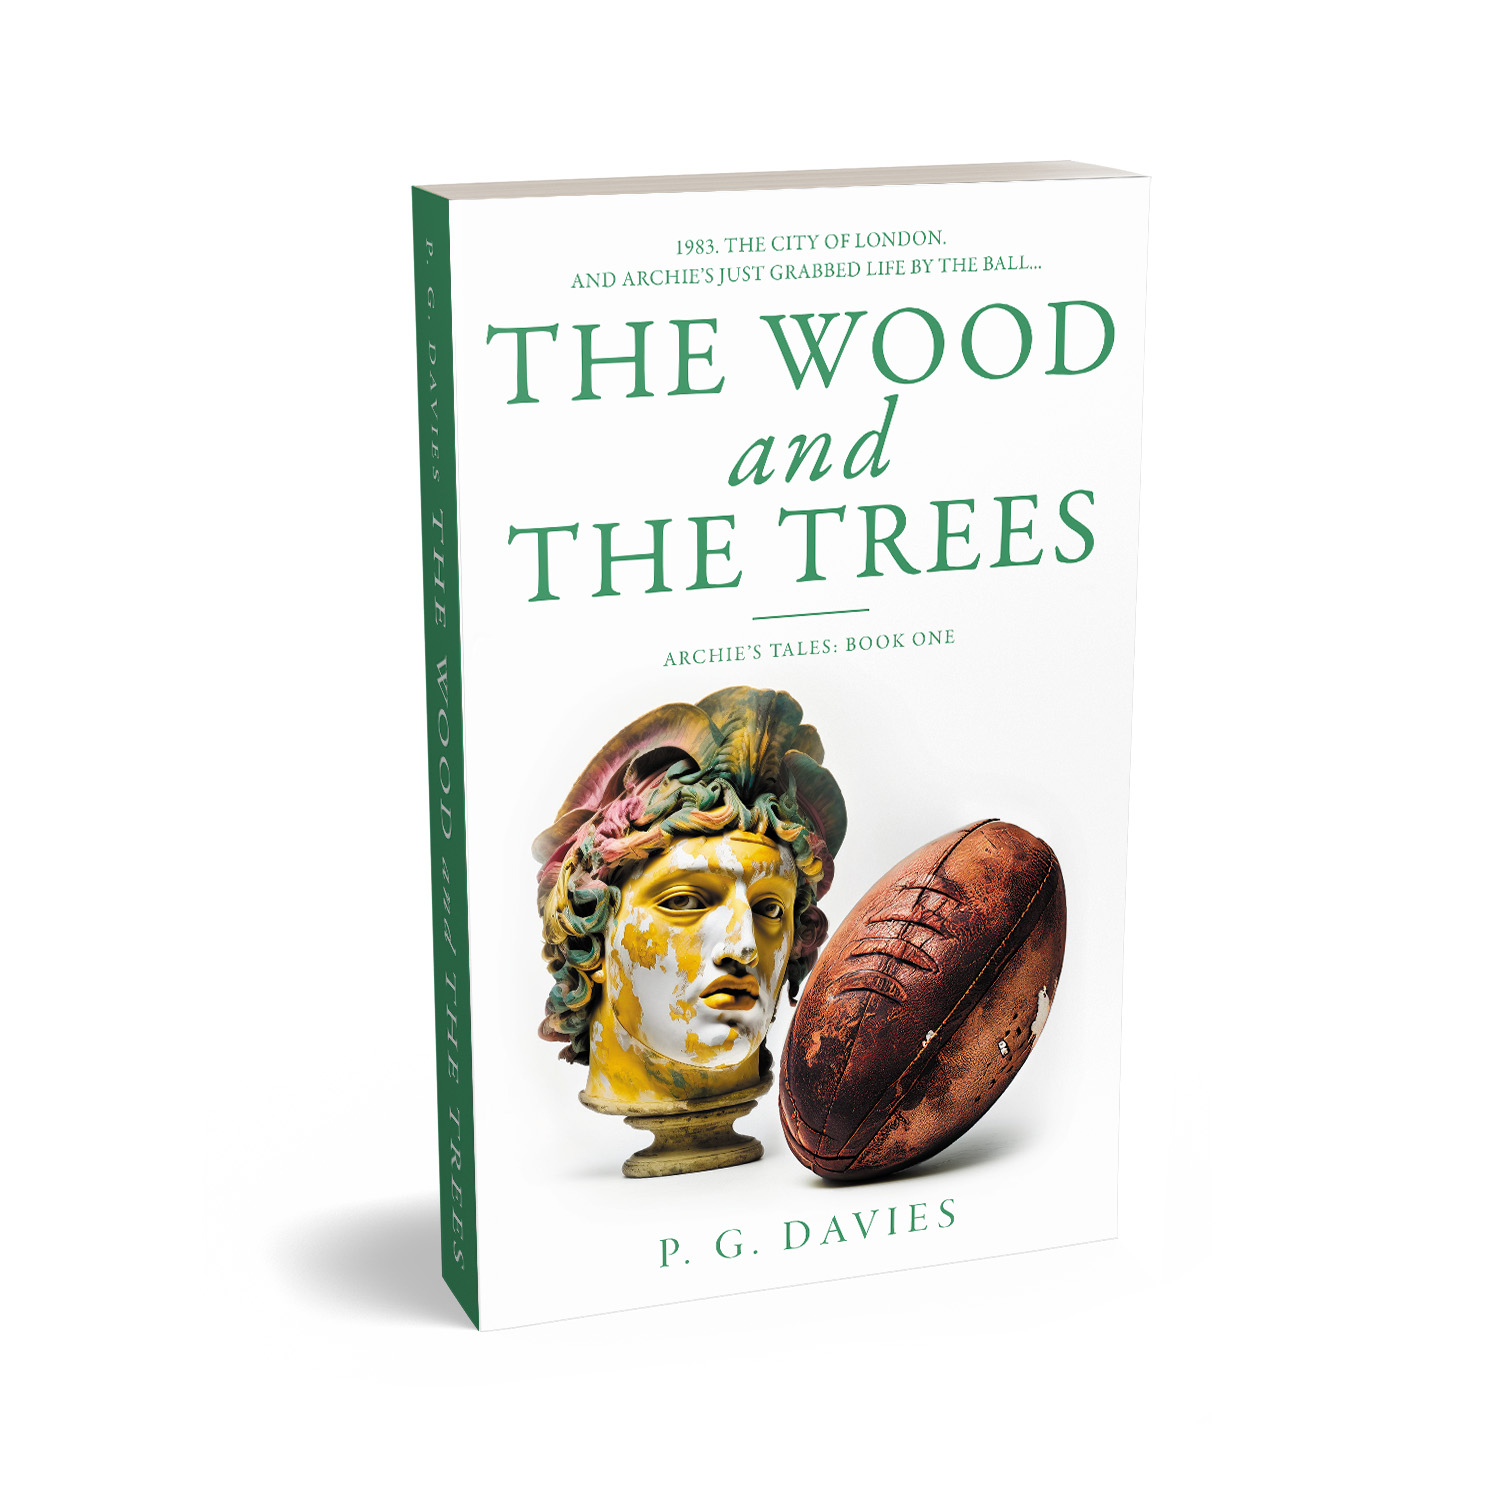 'The Wood and The Trees' is a heart-warming satirical novel set in the high-rolling financial boom of 1980s London. The author is P. G. Davies. The cover design and interior formatting are by Mark Thomas of coverness.com. To find out more about my book design services, please visit www.coverness.com.